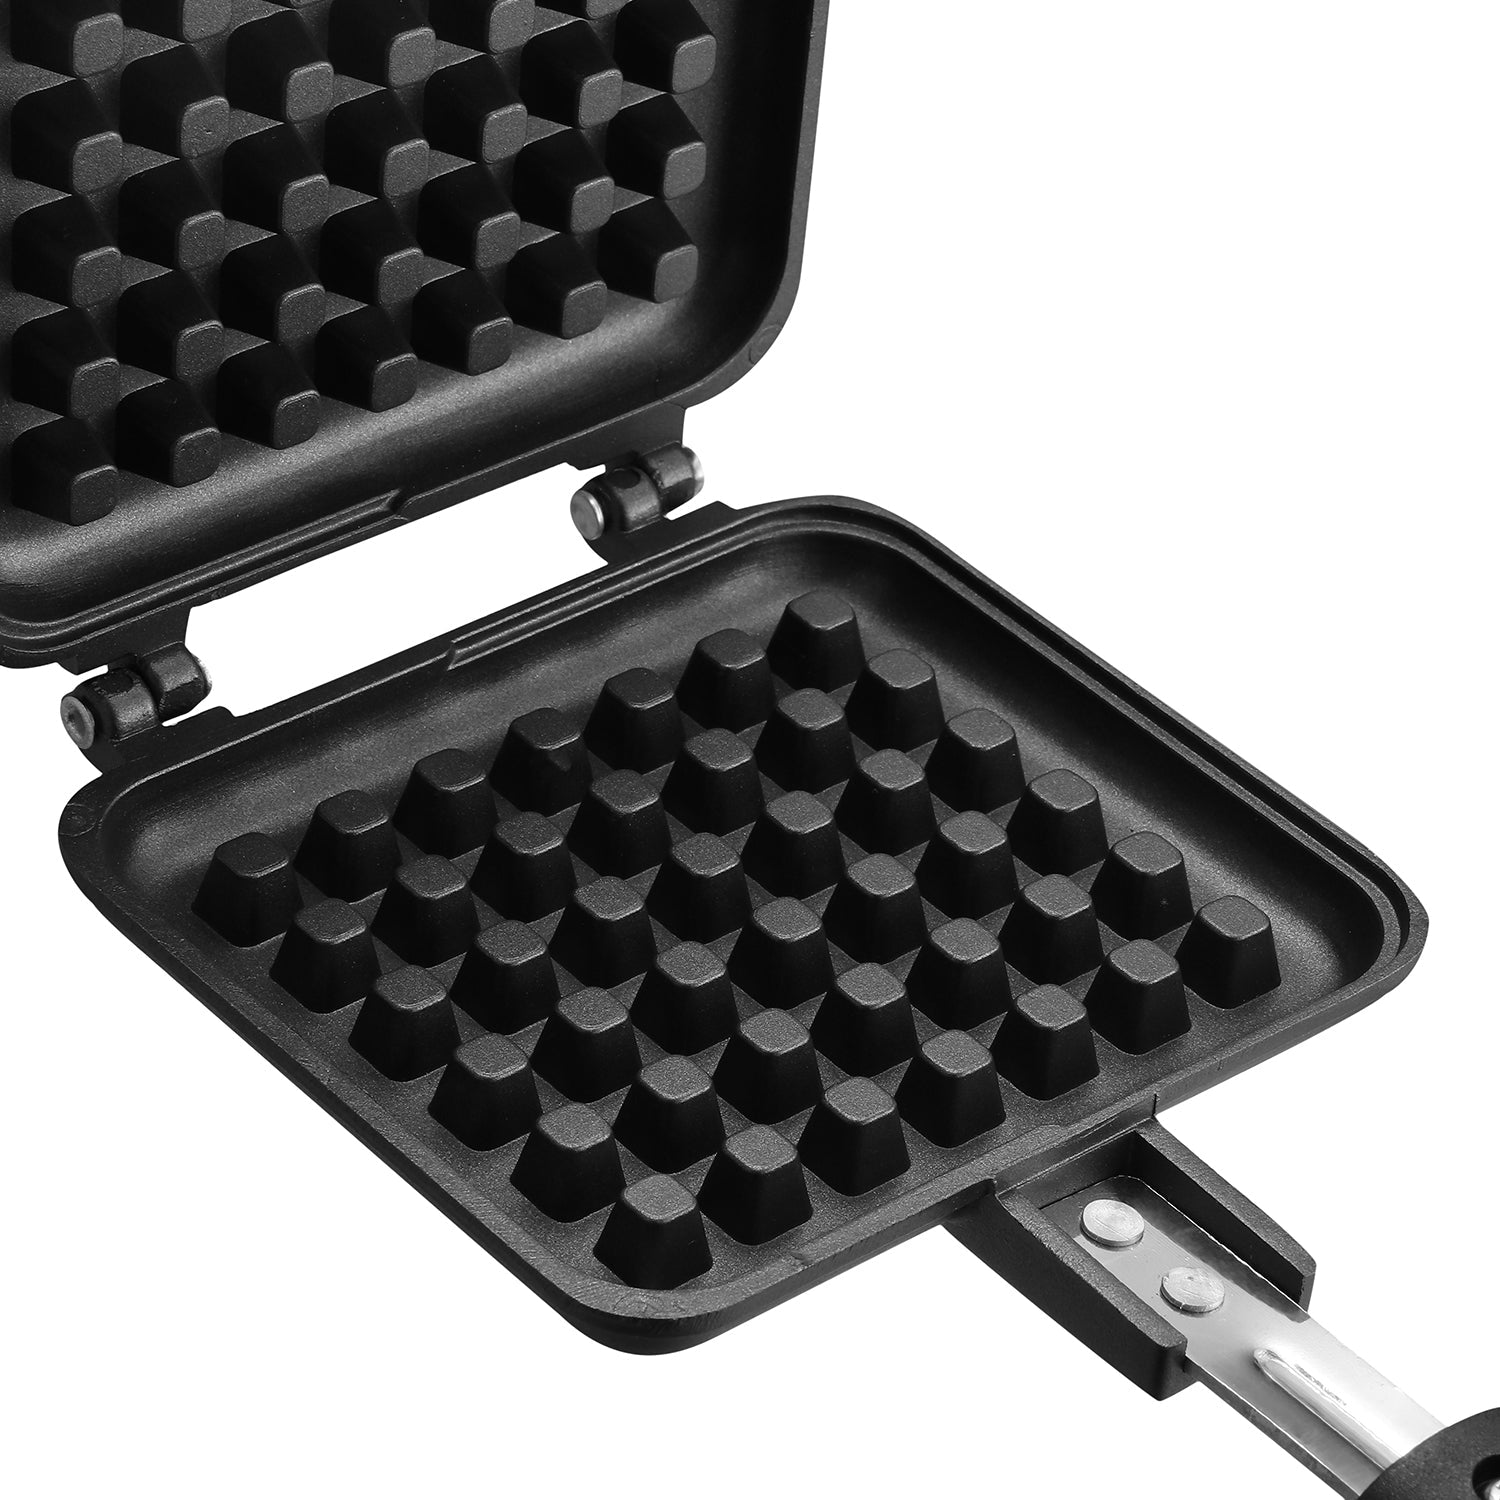 Gas Waffle Maker with Toxin Free Non Stick Coating